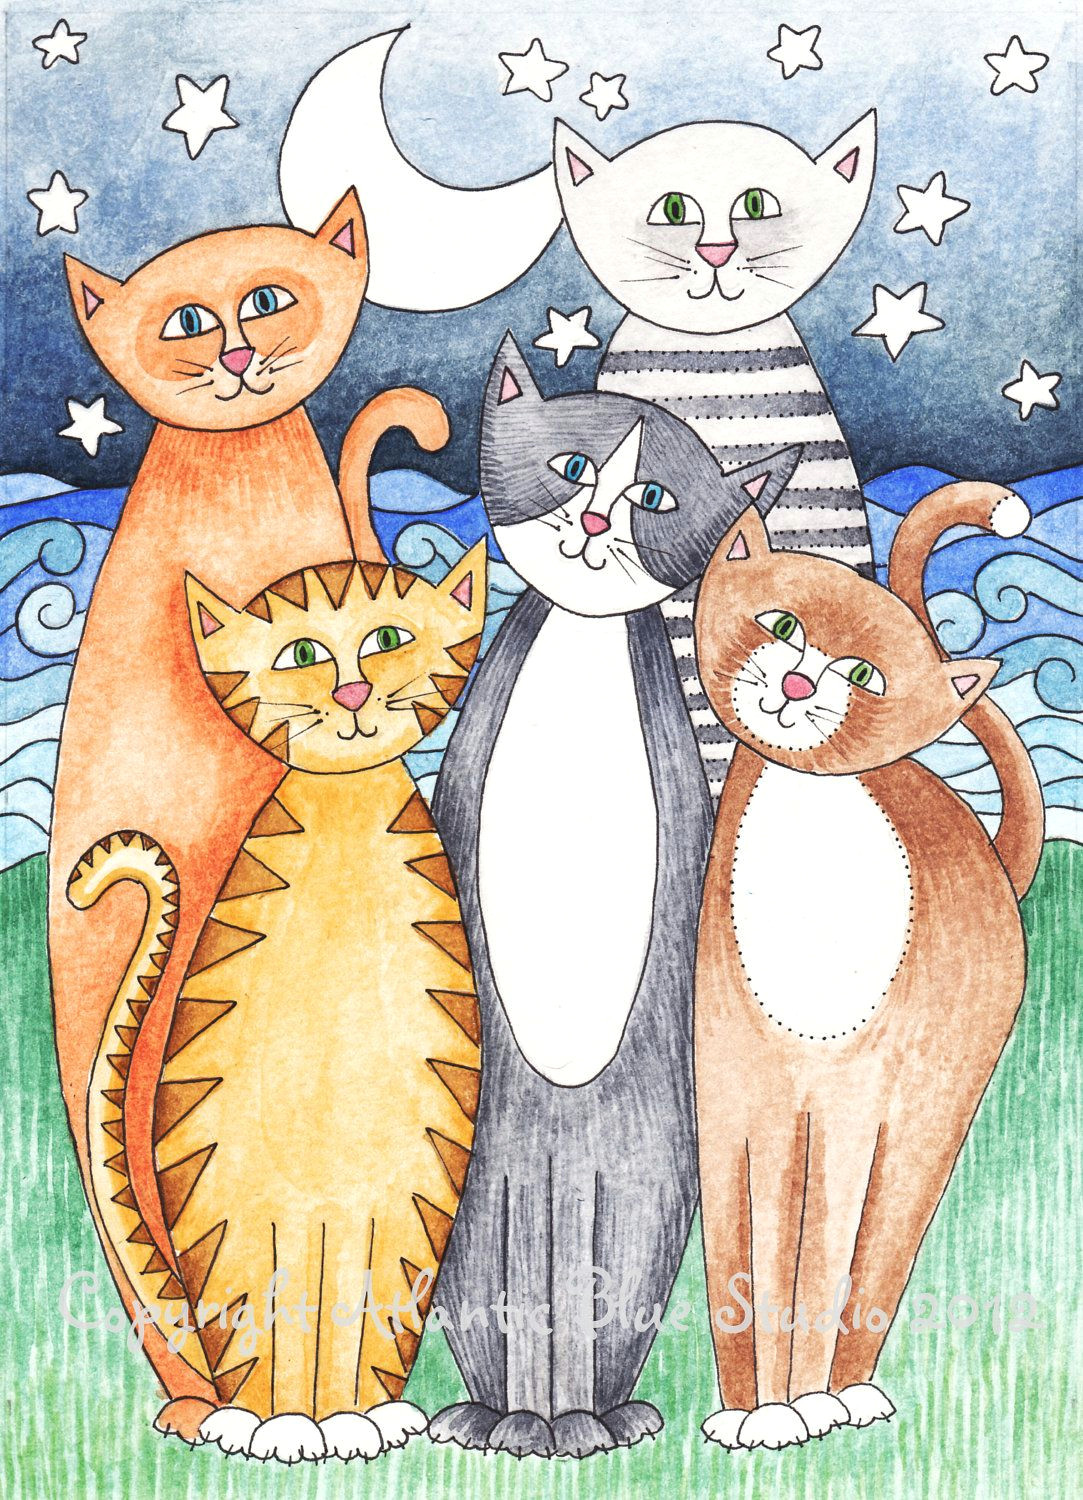 Childs Drawing Of A Cat Happy Cats Cat Greetings Card Cat Birthday Card Cat Art